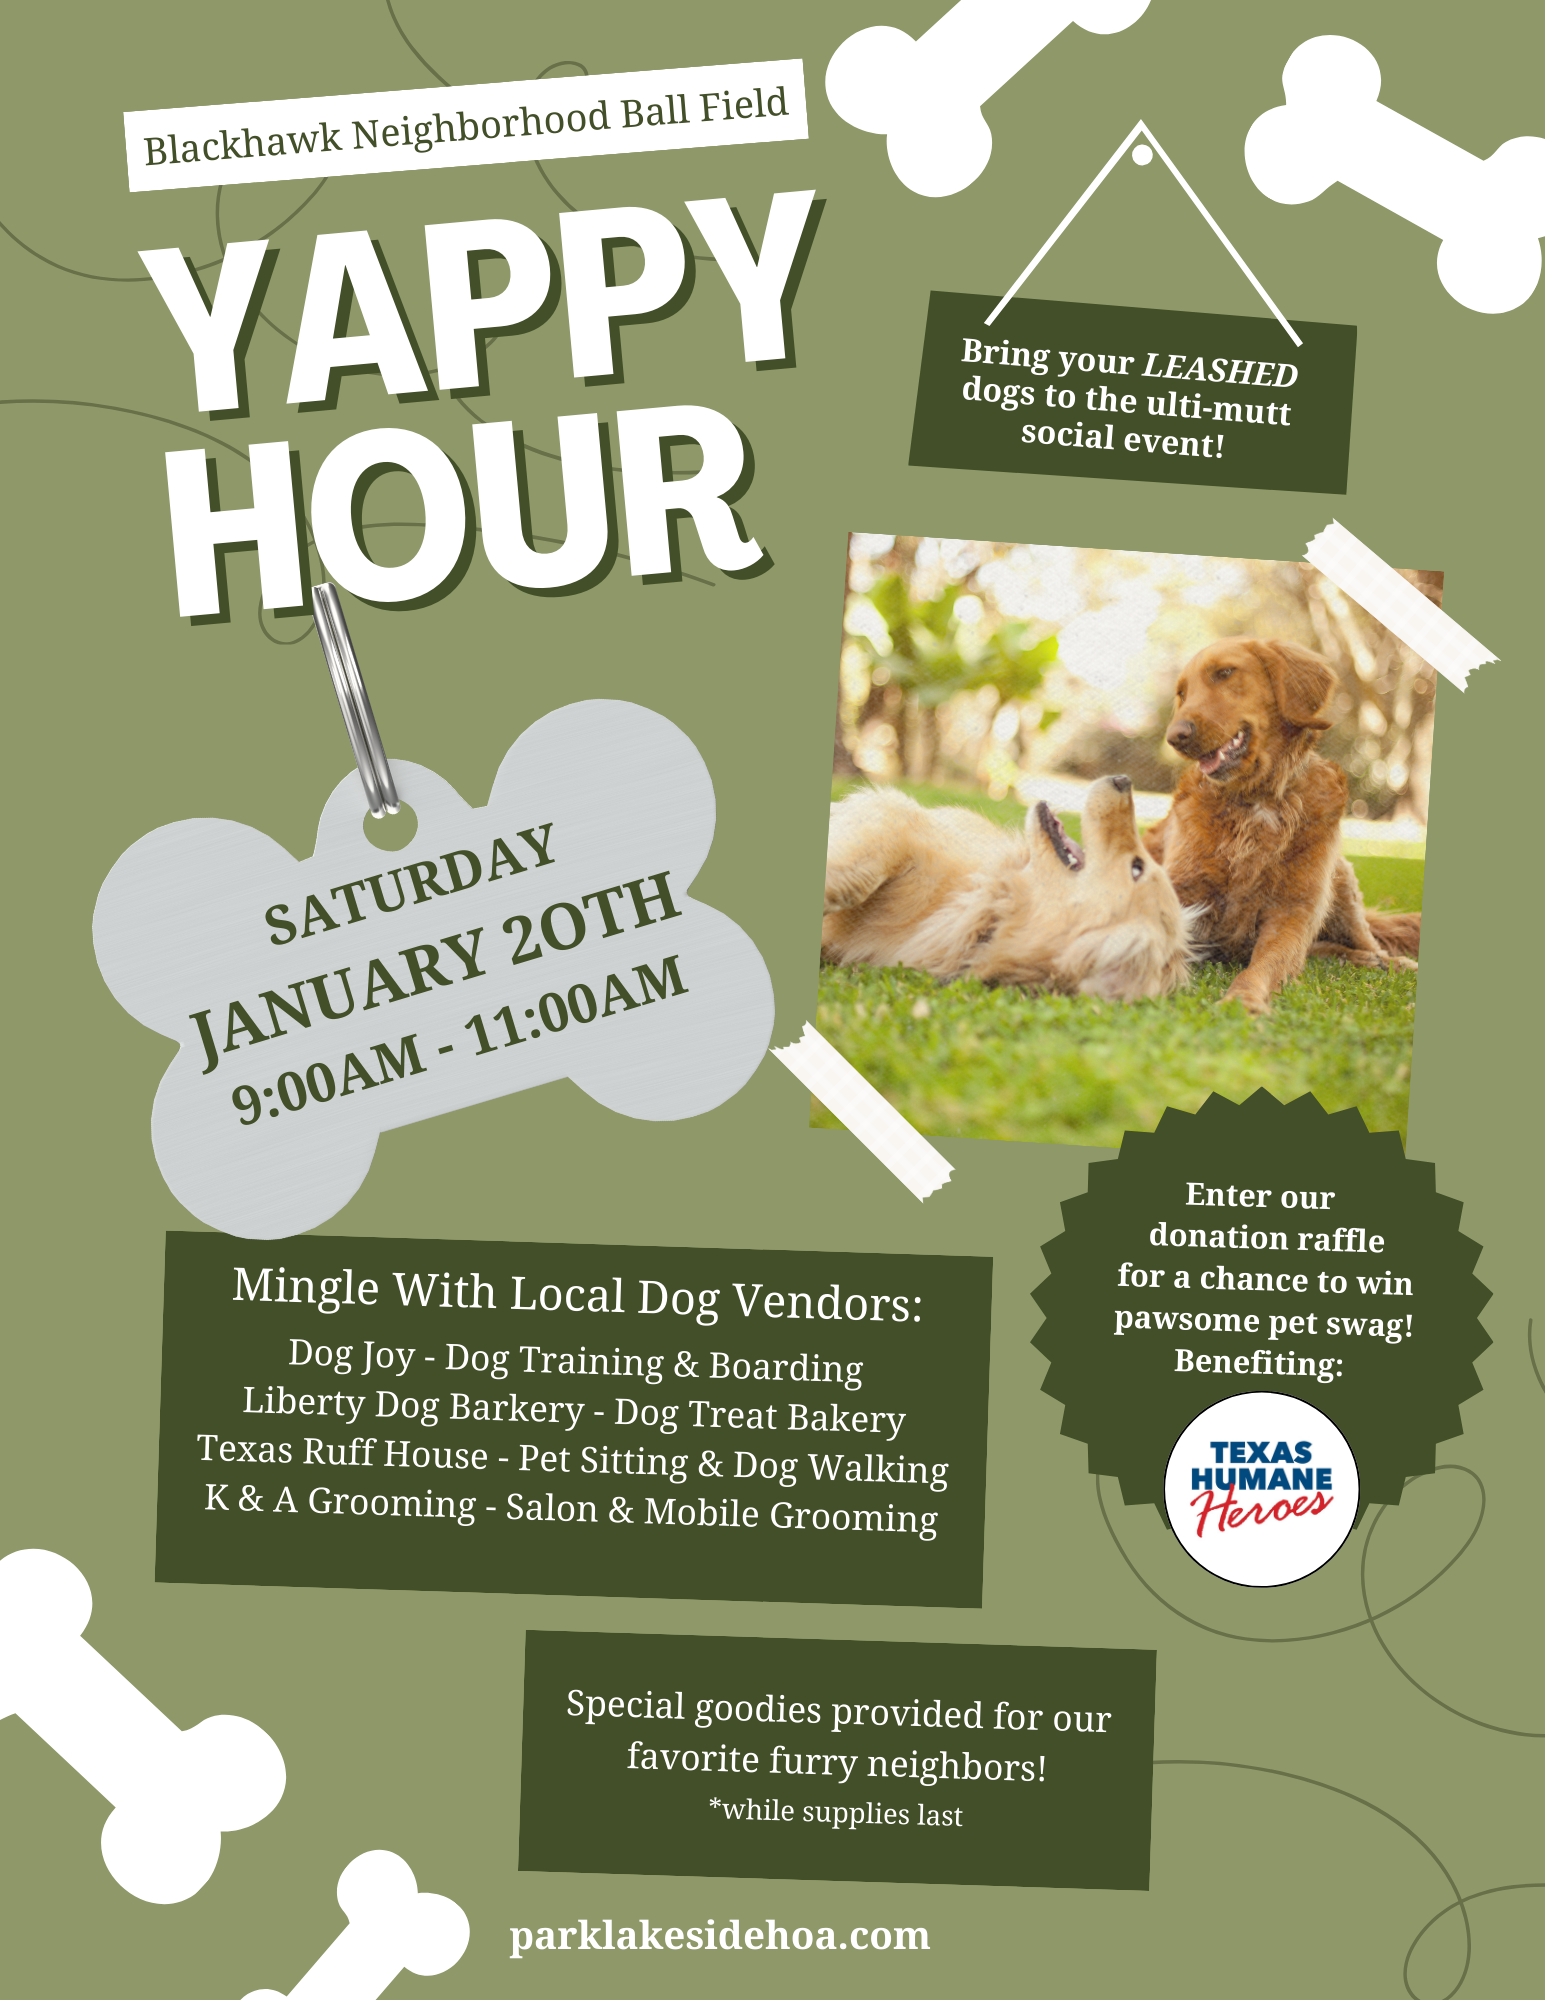 Promotional flyer for a community event titled 'Yappy Hour' at Blackhawk Neighborhood Ball Field, scheduled for Saturday, January 20th from 9:00 AM to 11:00 AM. Attendees are invited to bring their leashed dogs to the ultimate social event. The flyer features a photo of two dogs playing and information about mingling with local dog vendors such as Dog Joy, Liberty Dog Barkery, Texas Ruff House, and K & A Grooming. There's a call to enter a donation raffle to win pet swag, benefiting Texas Humane Heroes. Special goodies are offered for furry friends while supplies last. Event details are on a green background with white bone decorations and the website parklakesidehoa.com listed at the bottom.